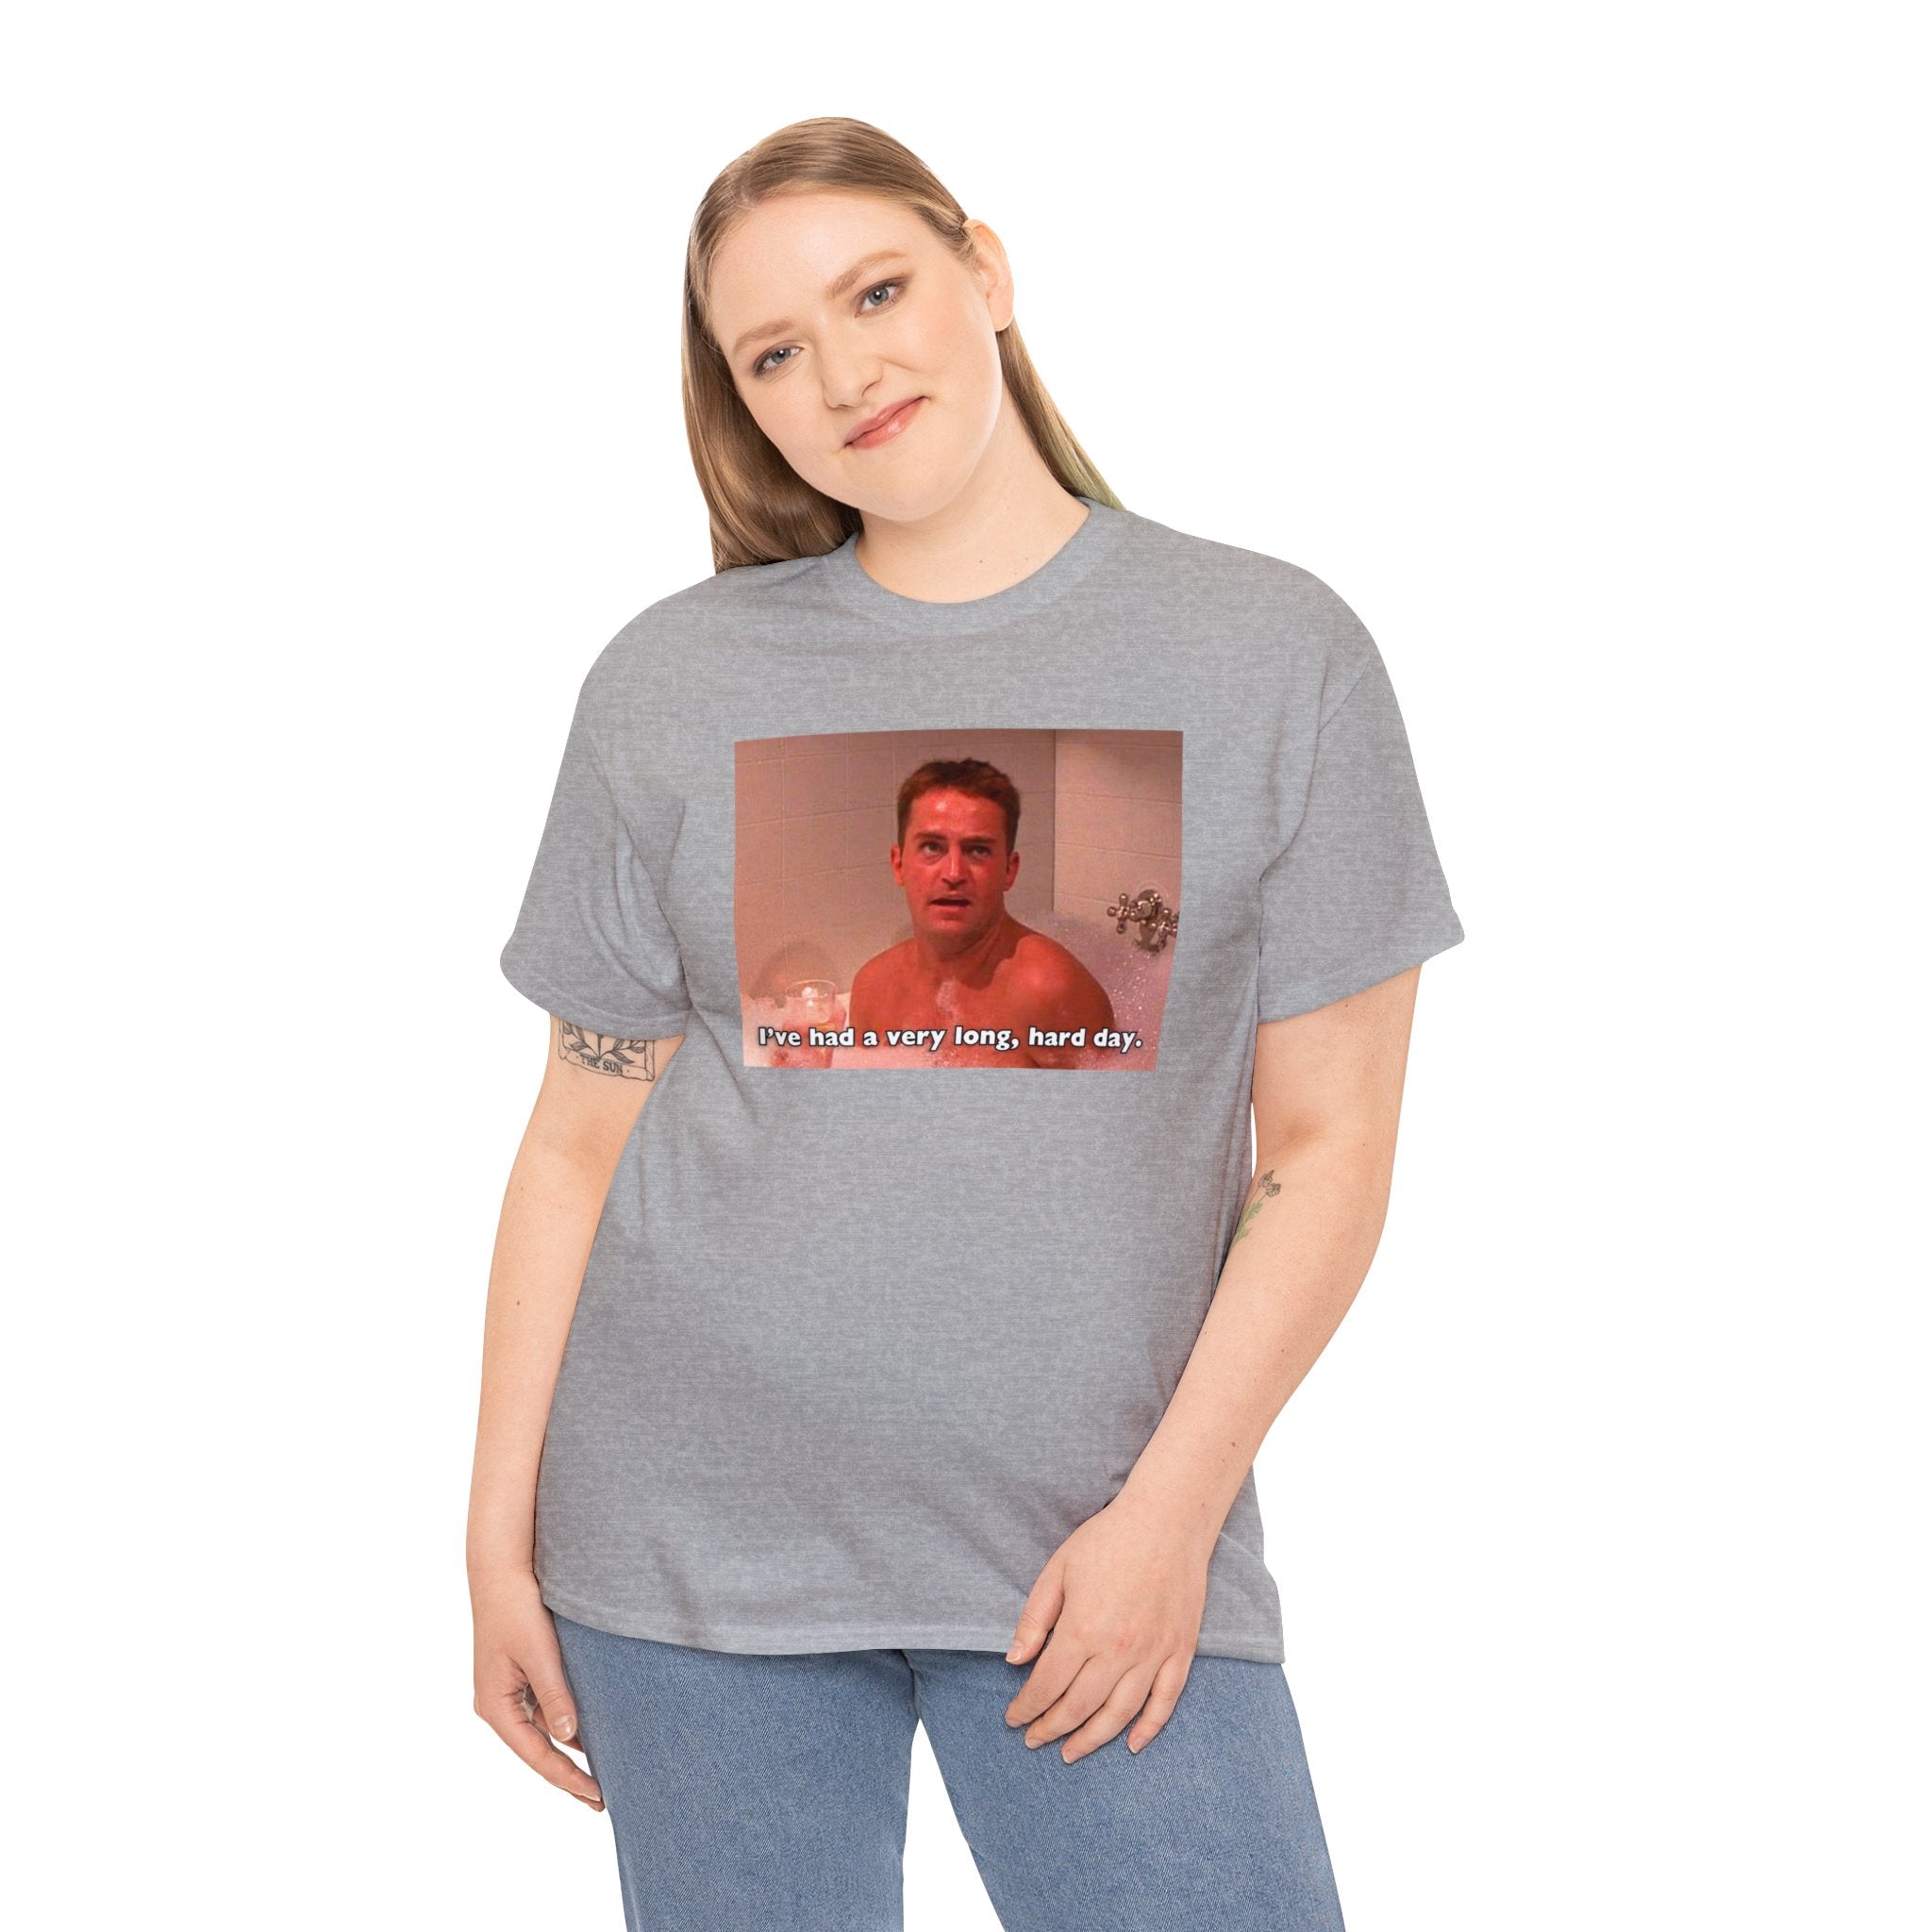 I've had a very long, hard day (Chandler Bing Friends) - Unisex Heavy Cotton Tee